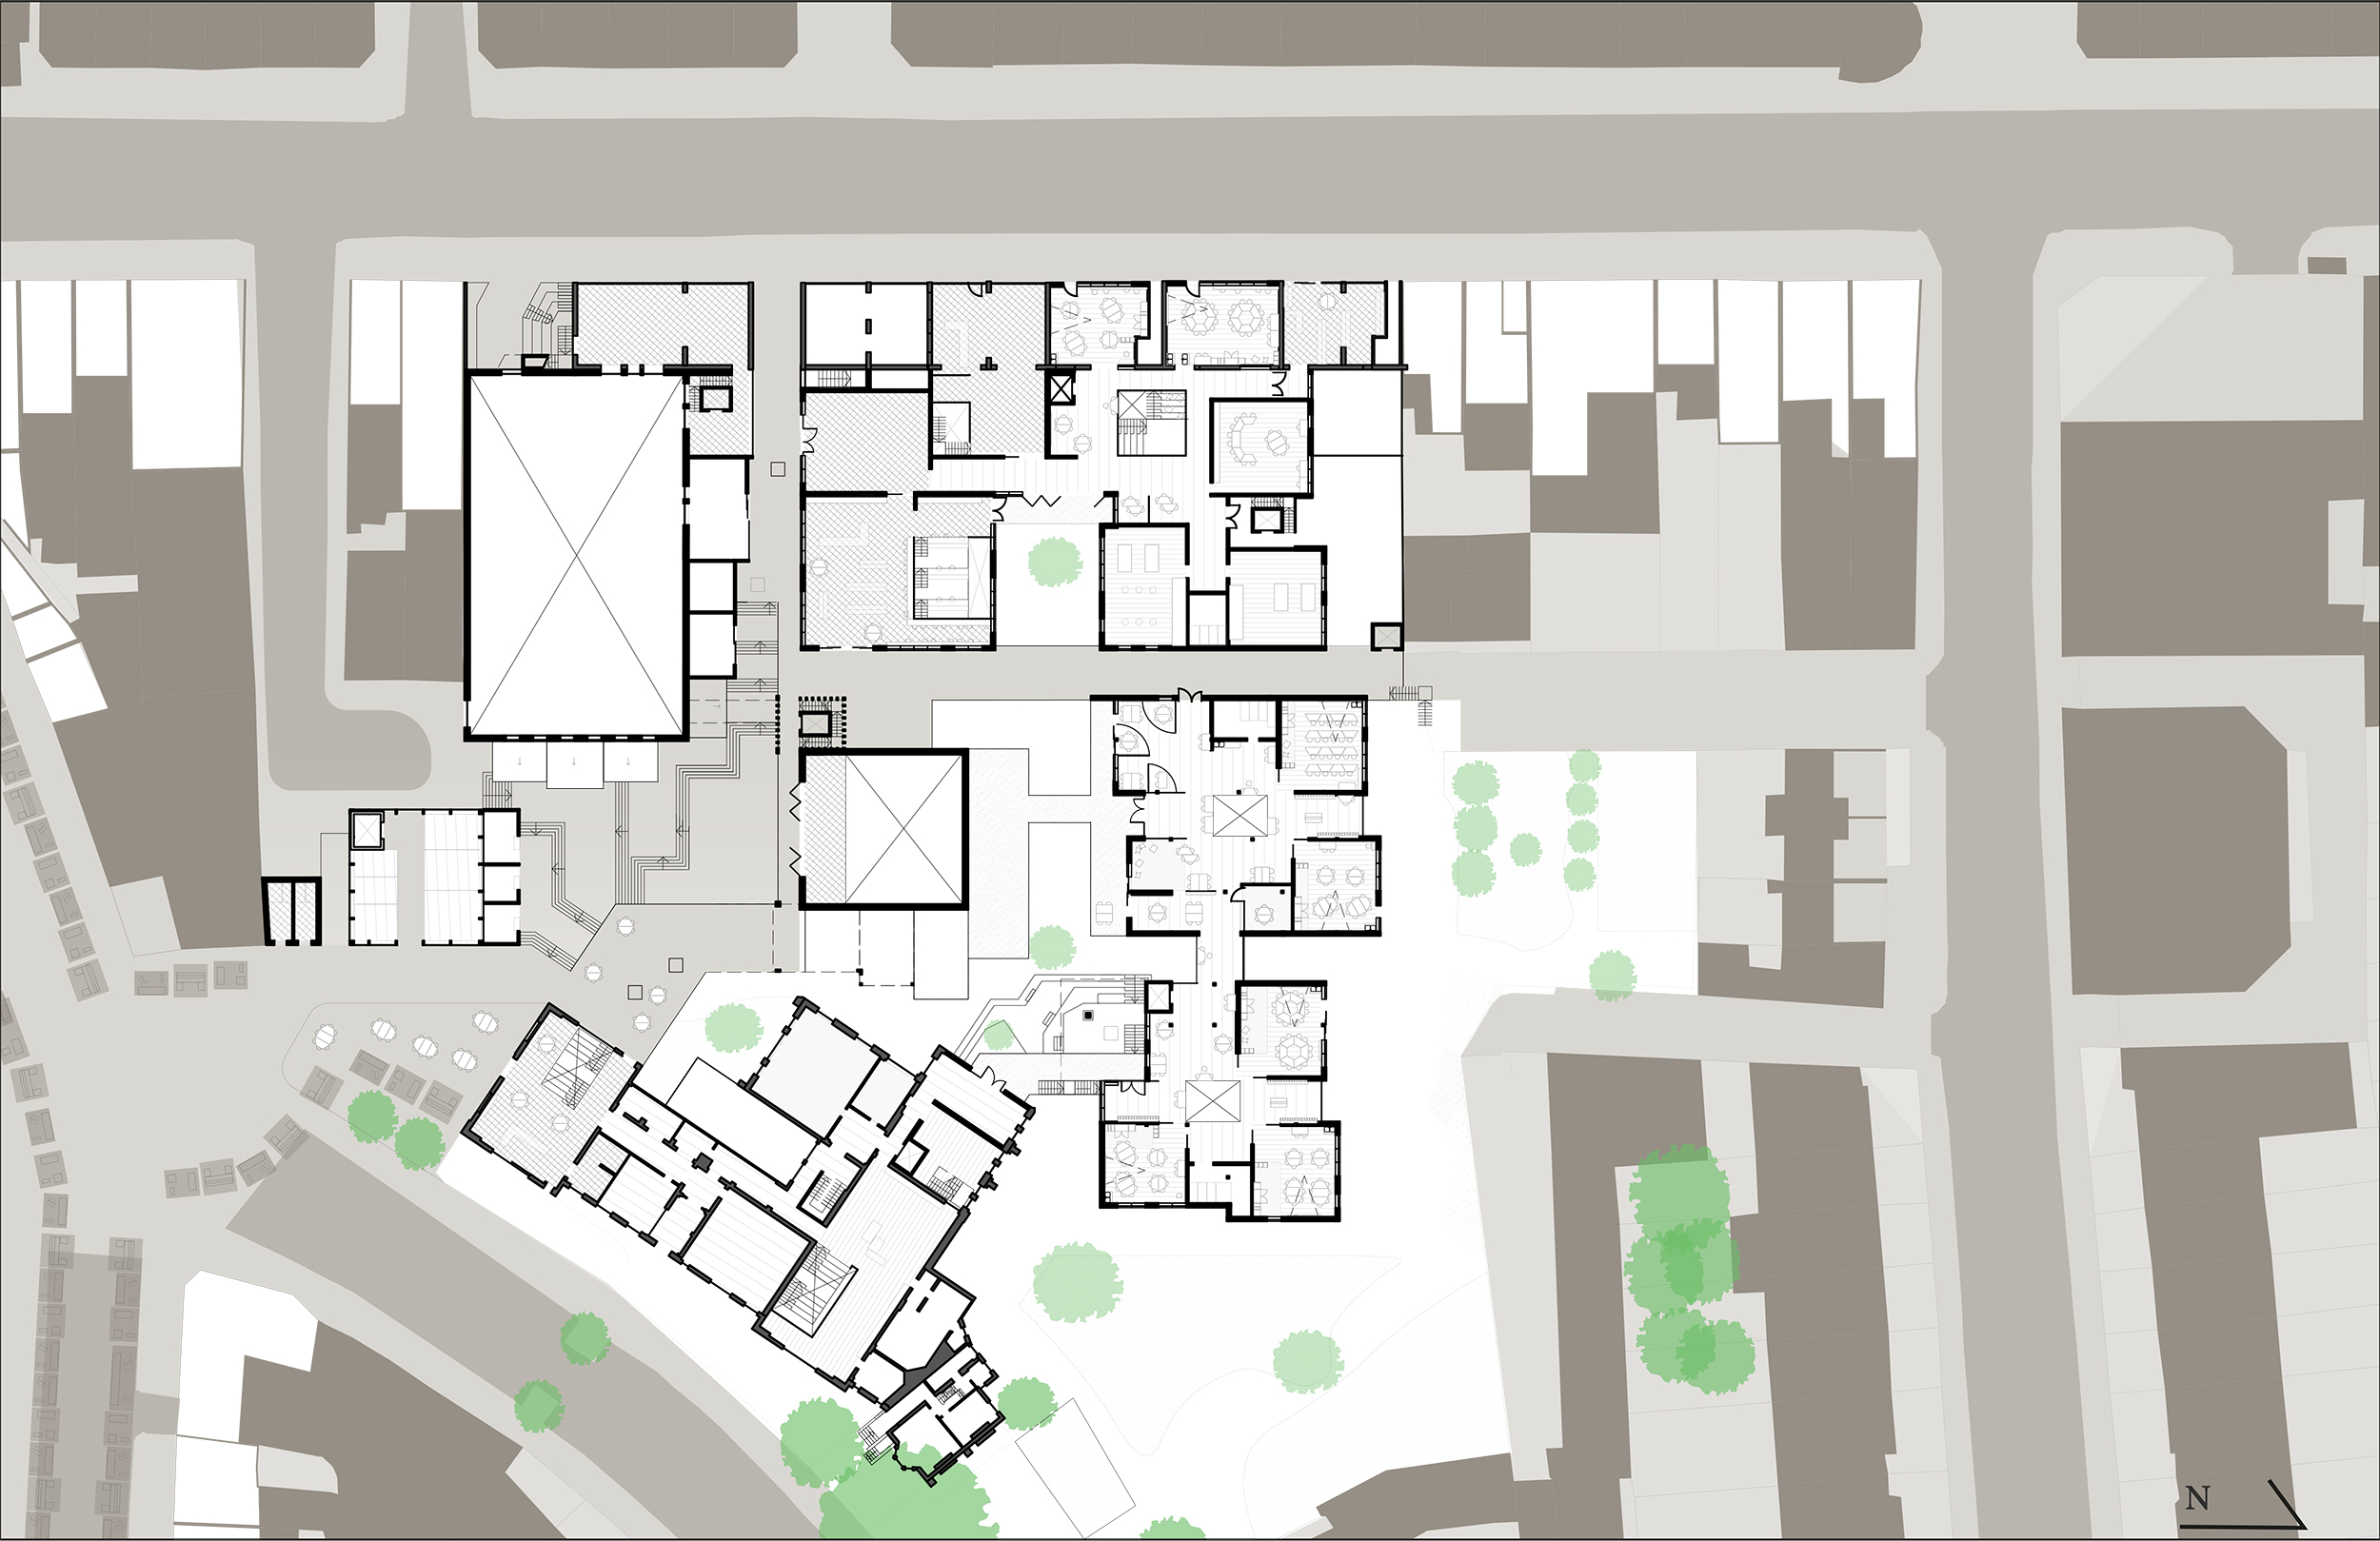 Upper ground floor plan: connecting Ridley Road to Kingsland High Street